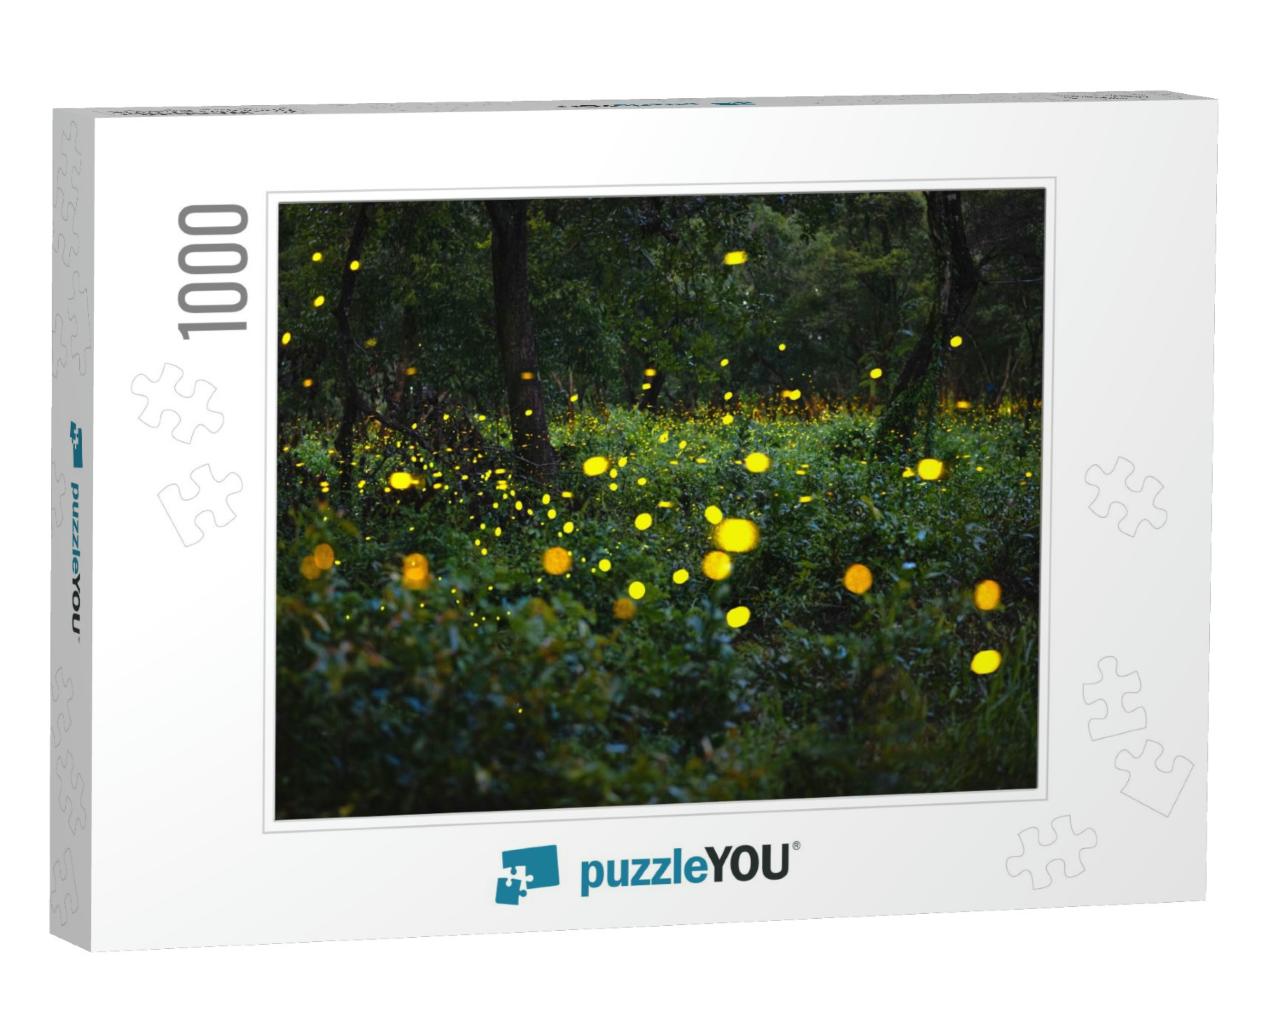 Abstract of Many Firefly Flying in the Forest. Fir... Jigsaw Puzzle with 1000 pieces